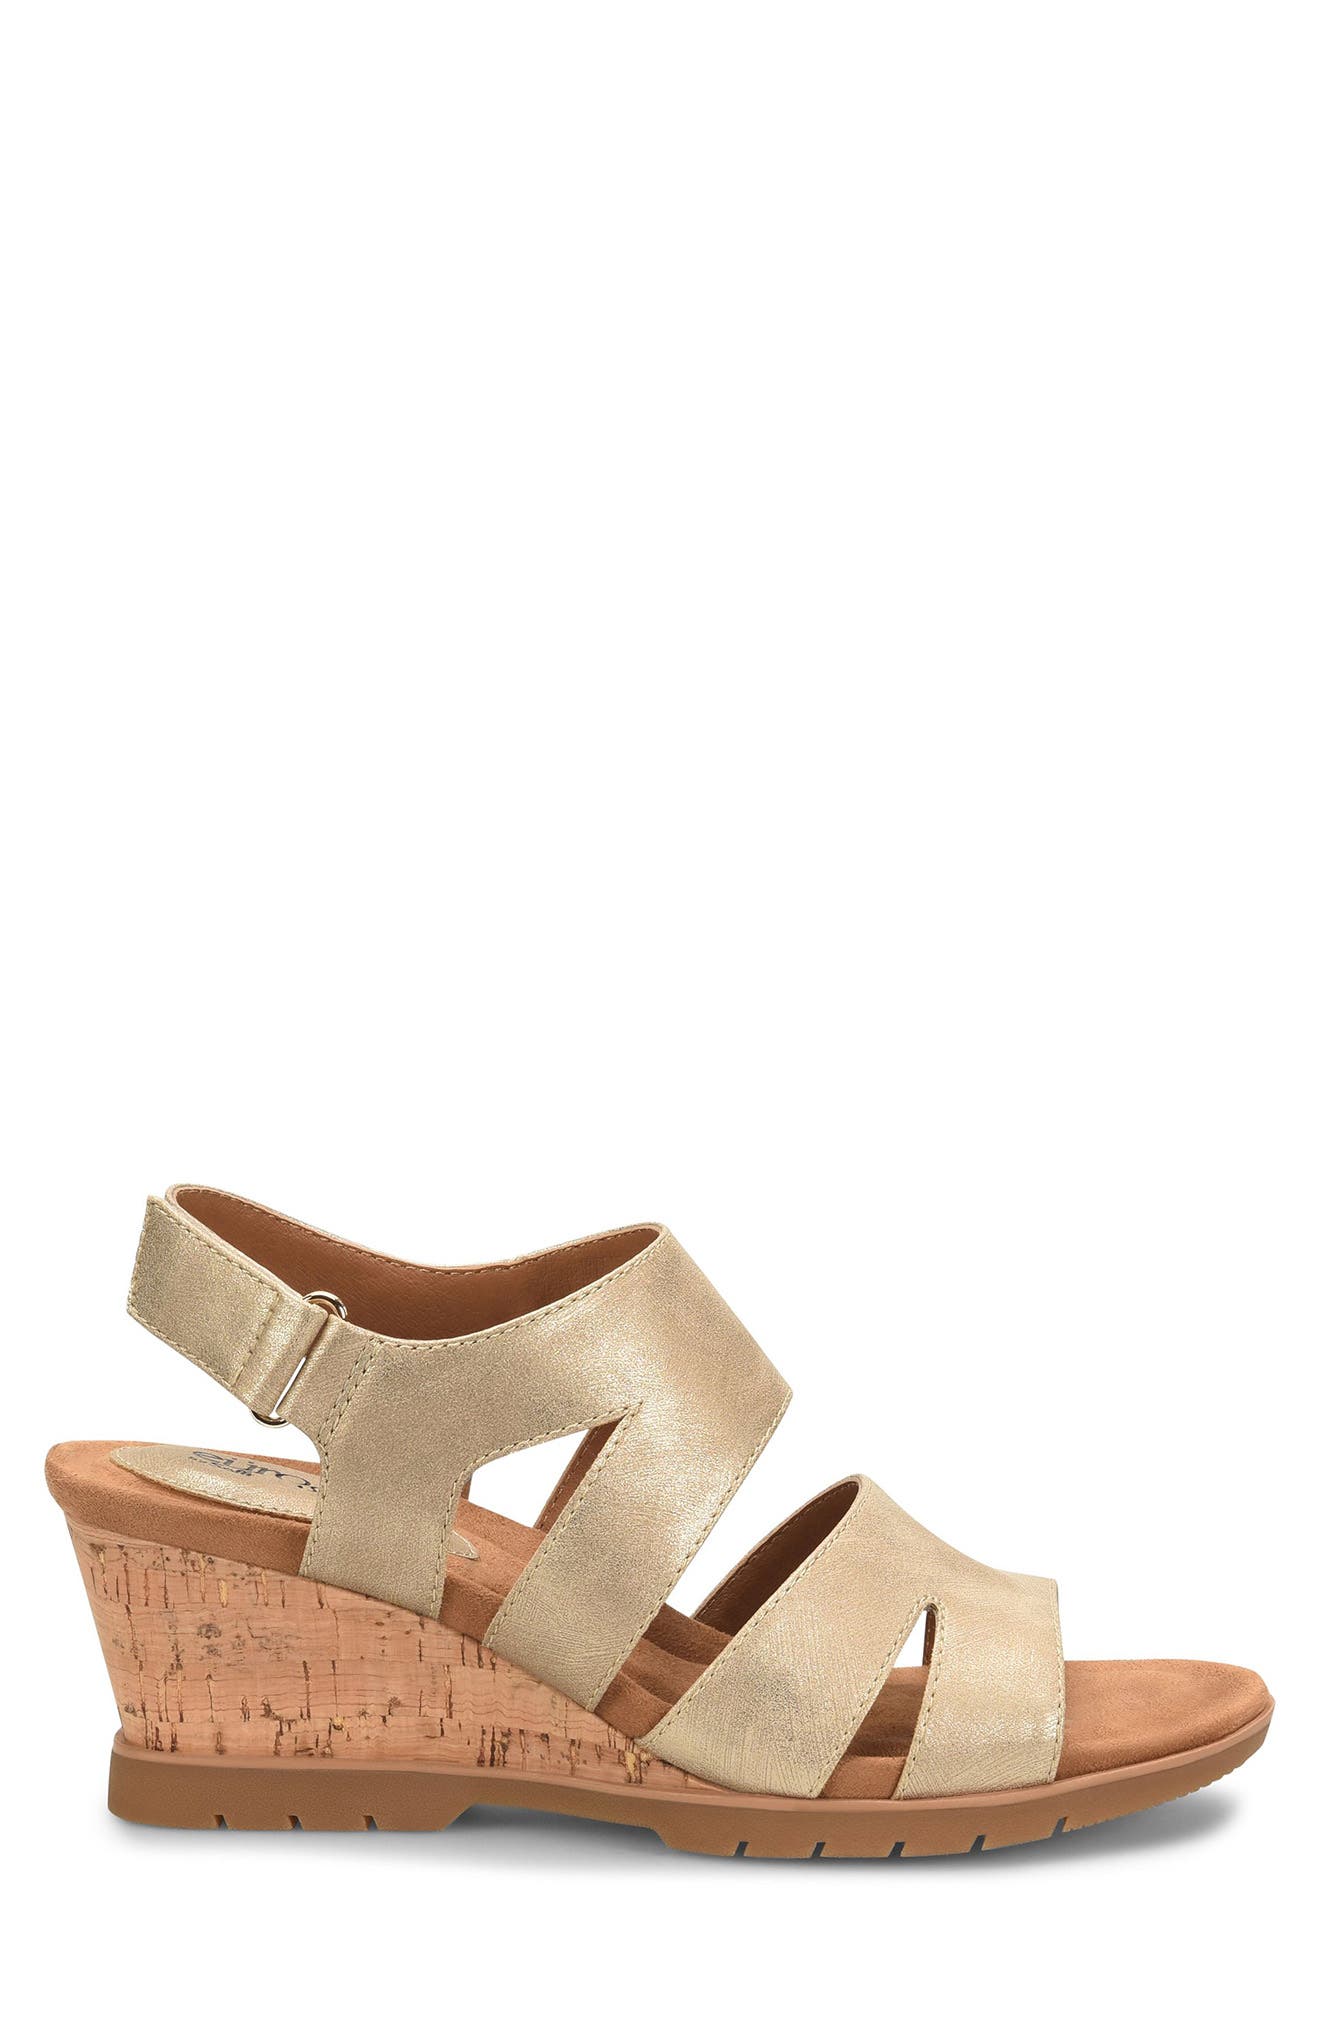 Obsession Rules Turin Taupe Wedge Sandals